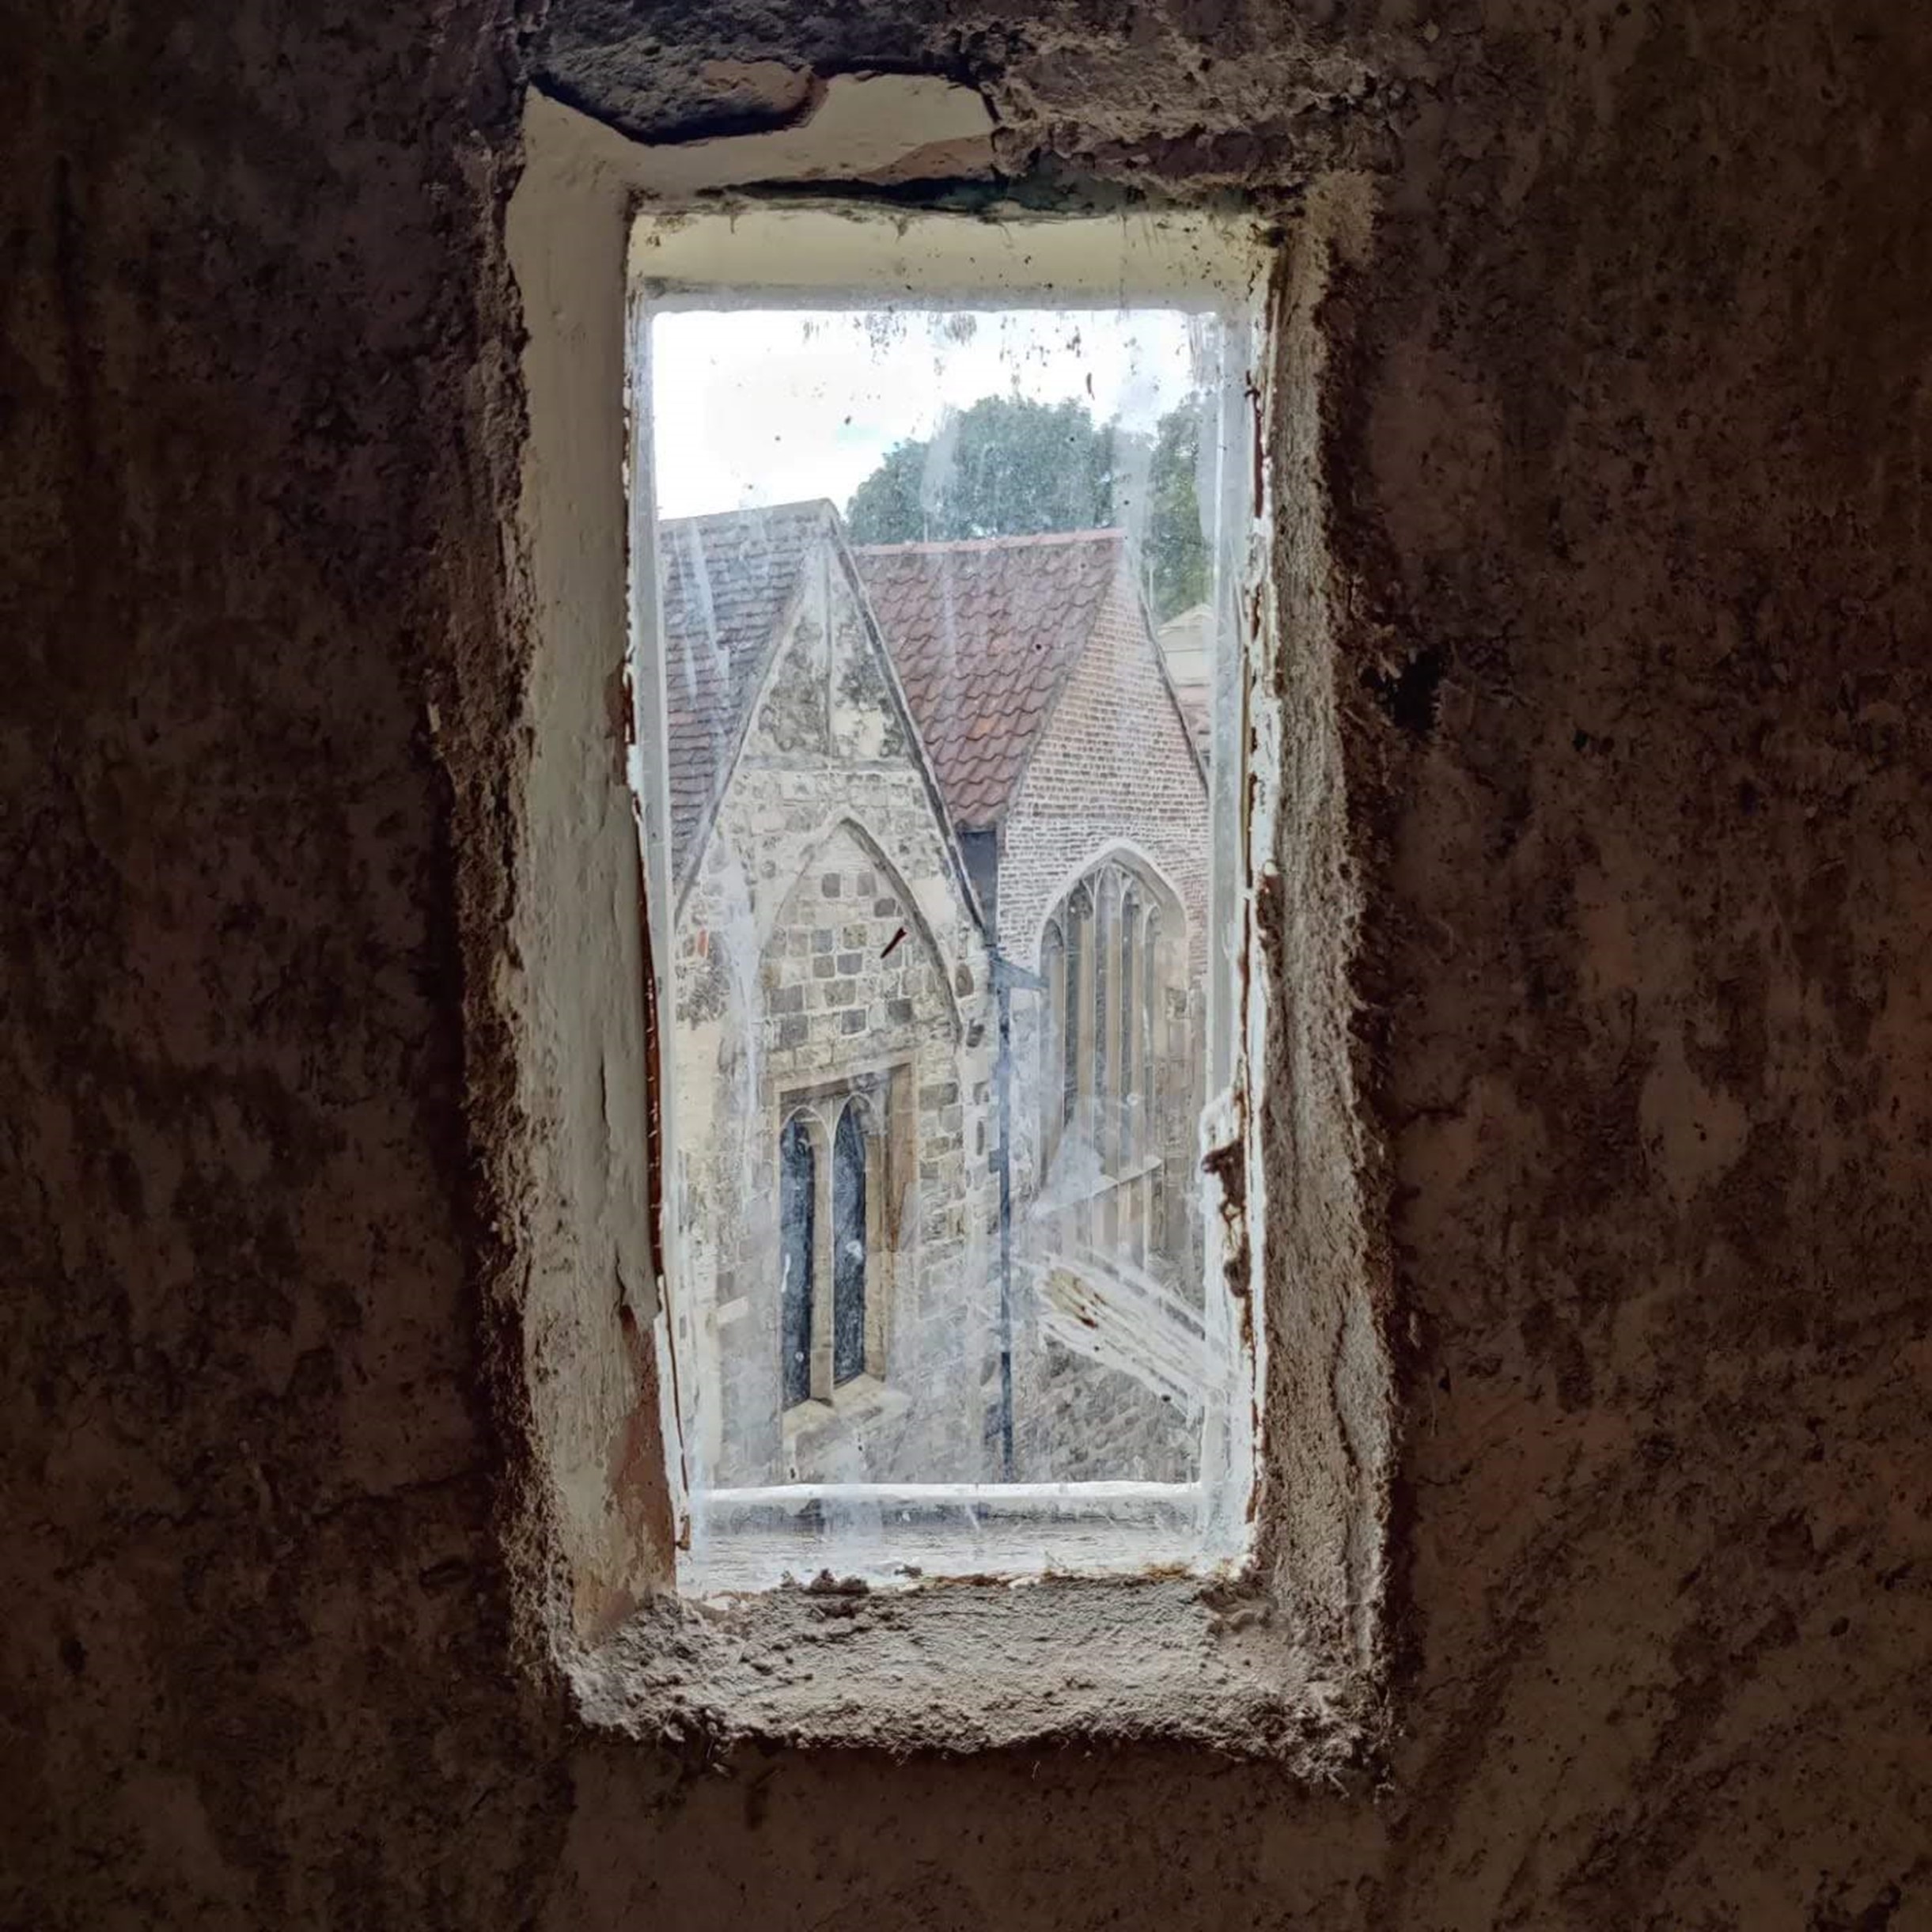 60 Goodramgate | York Conservation Trust | view to church